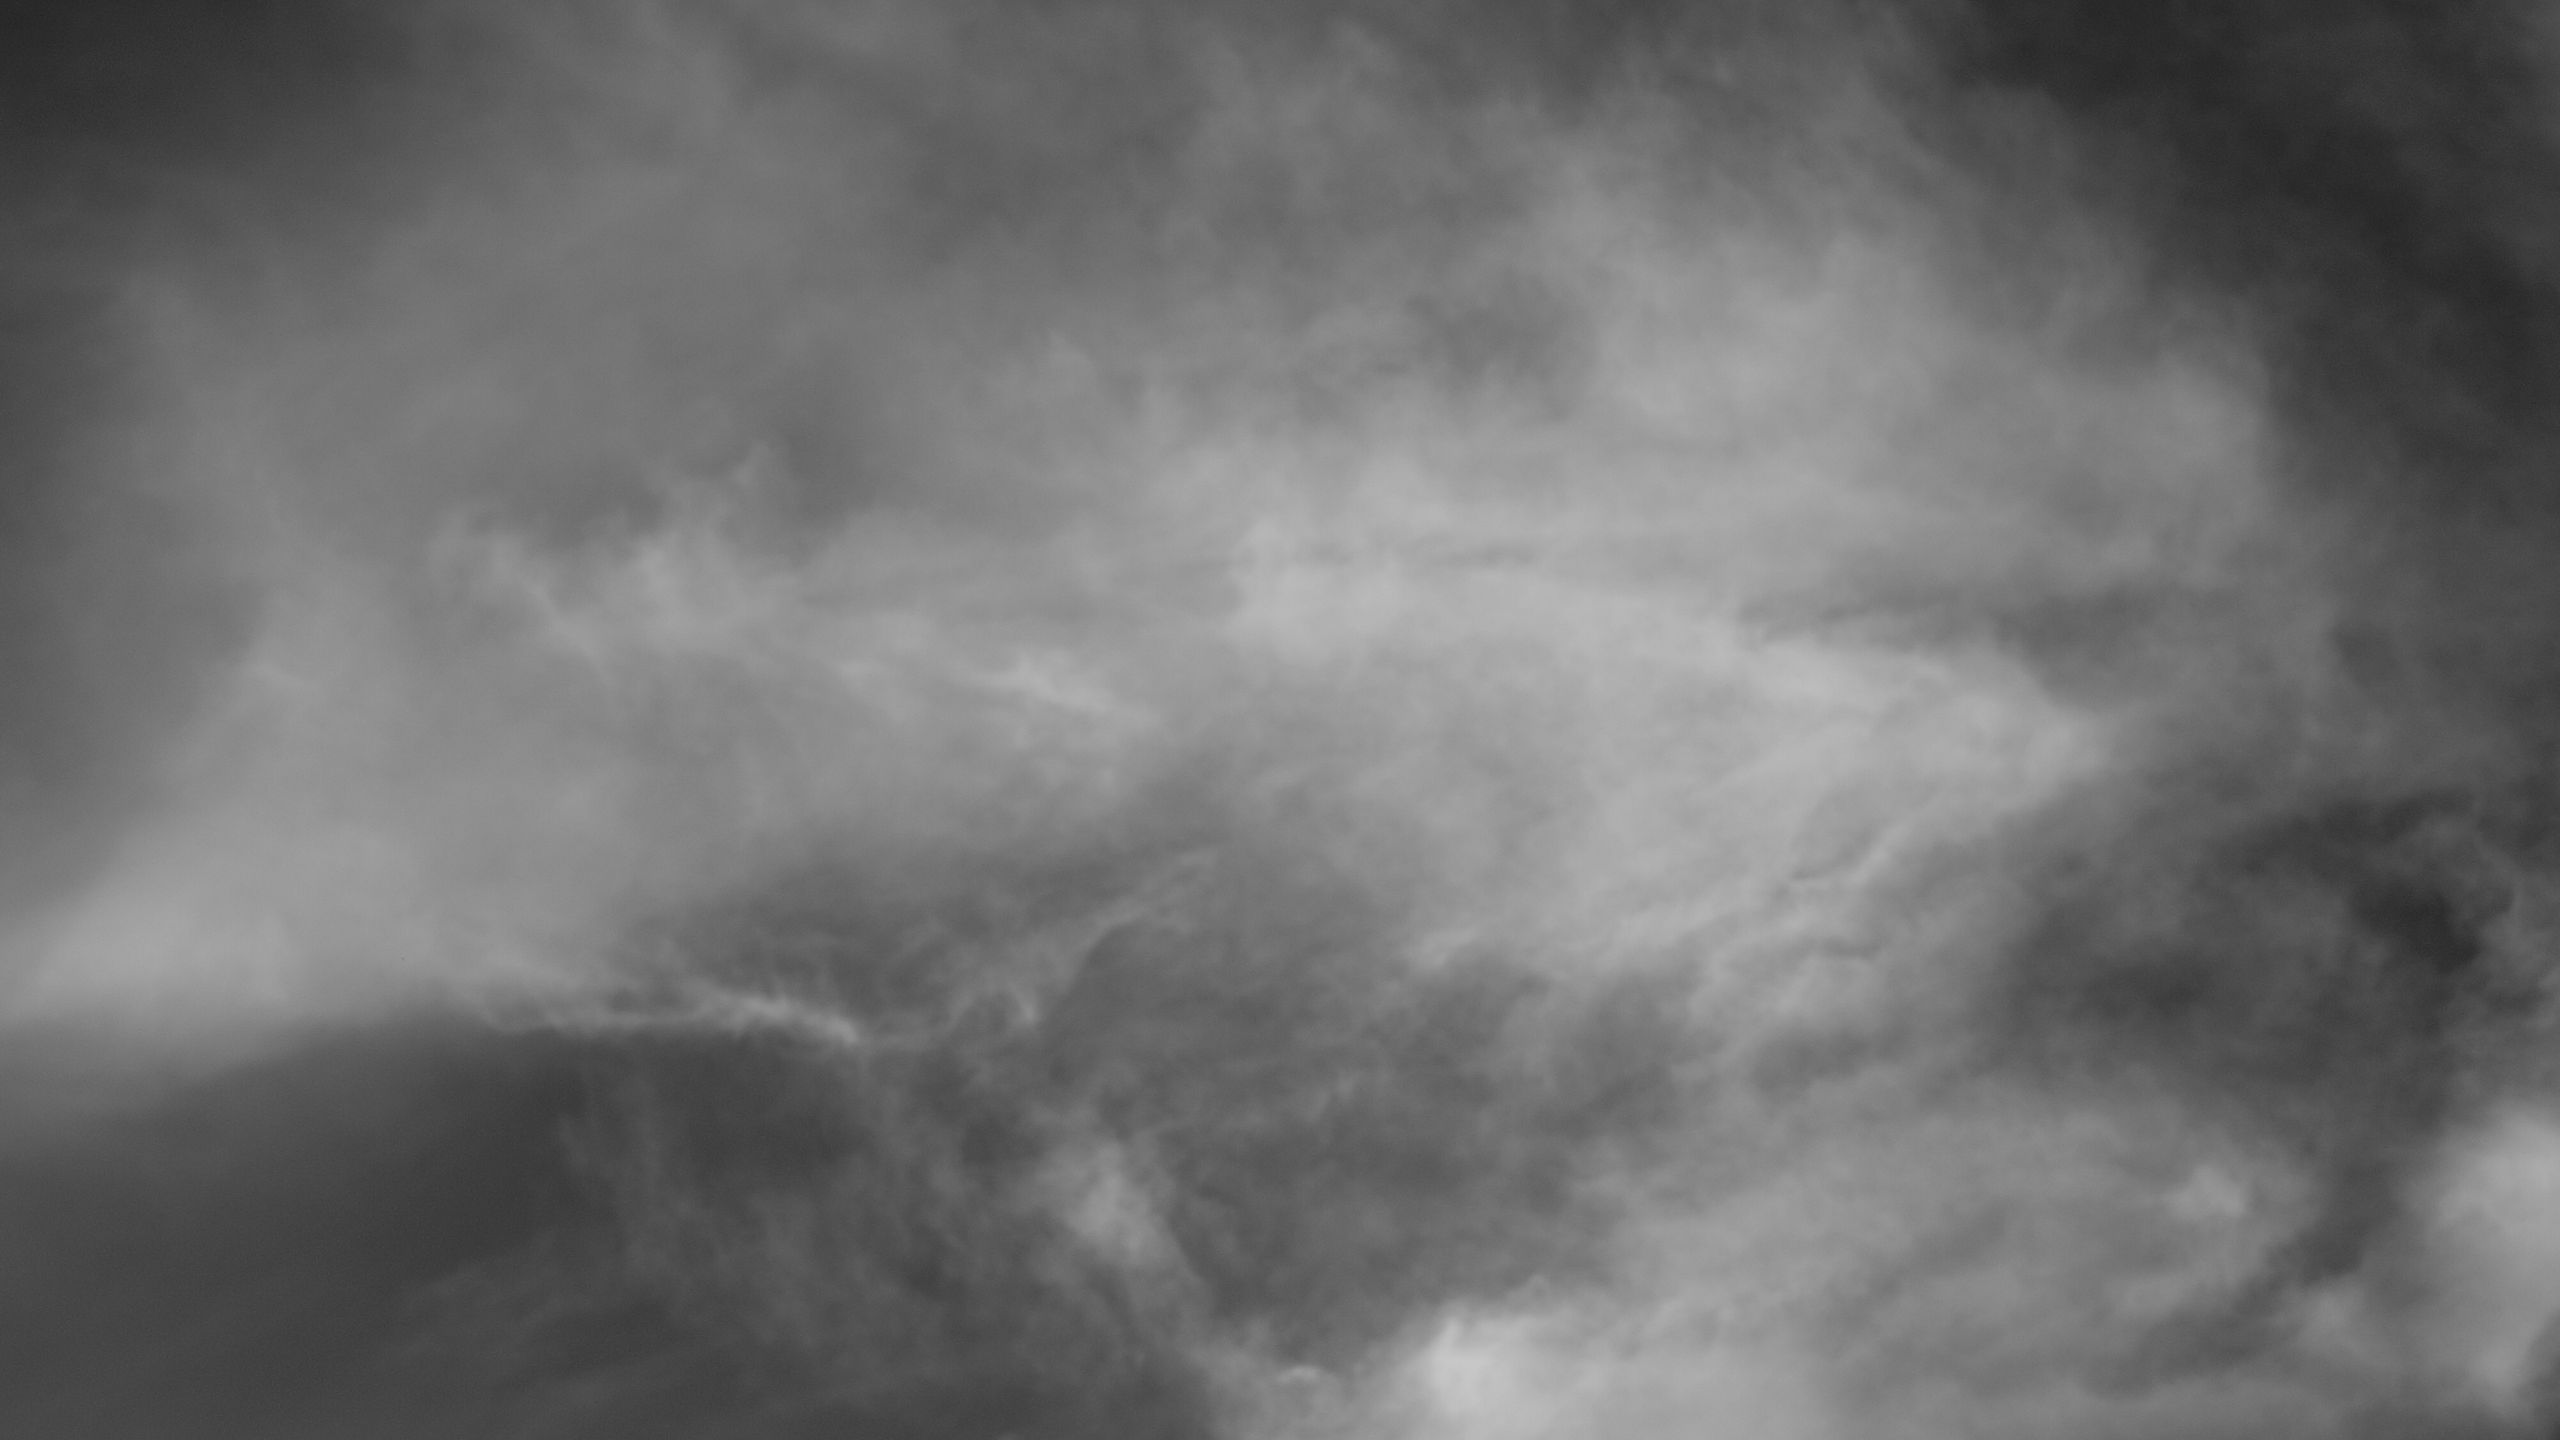 Download wallpaper 2560x1440 sky, clouds, bw, gray widescreen 16:9 hd  background